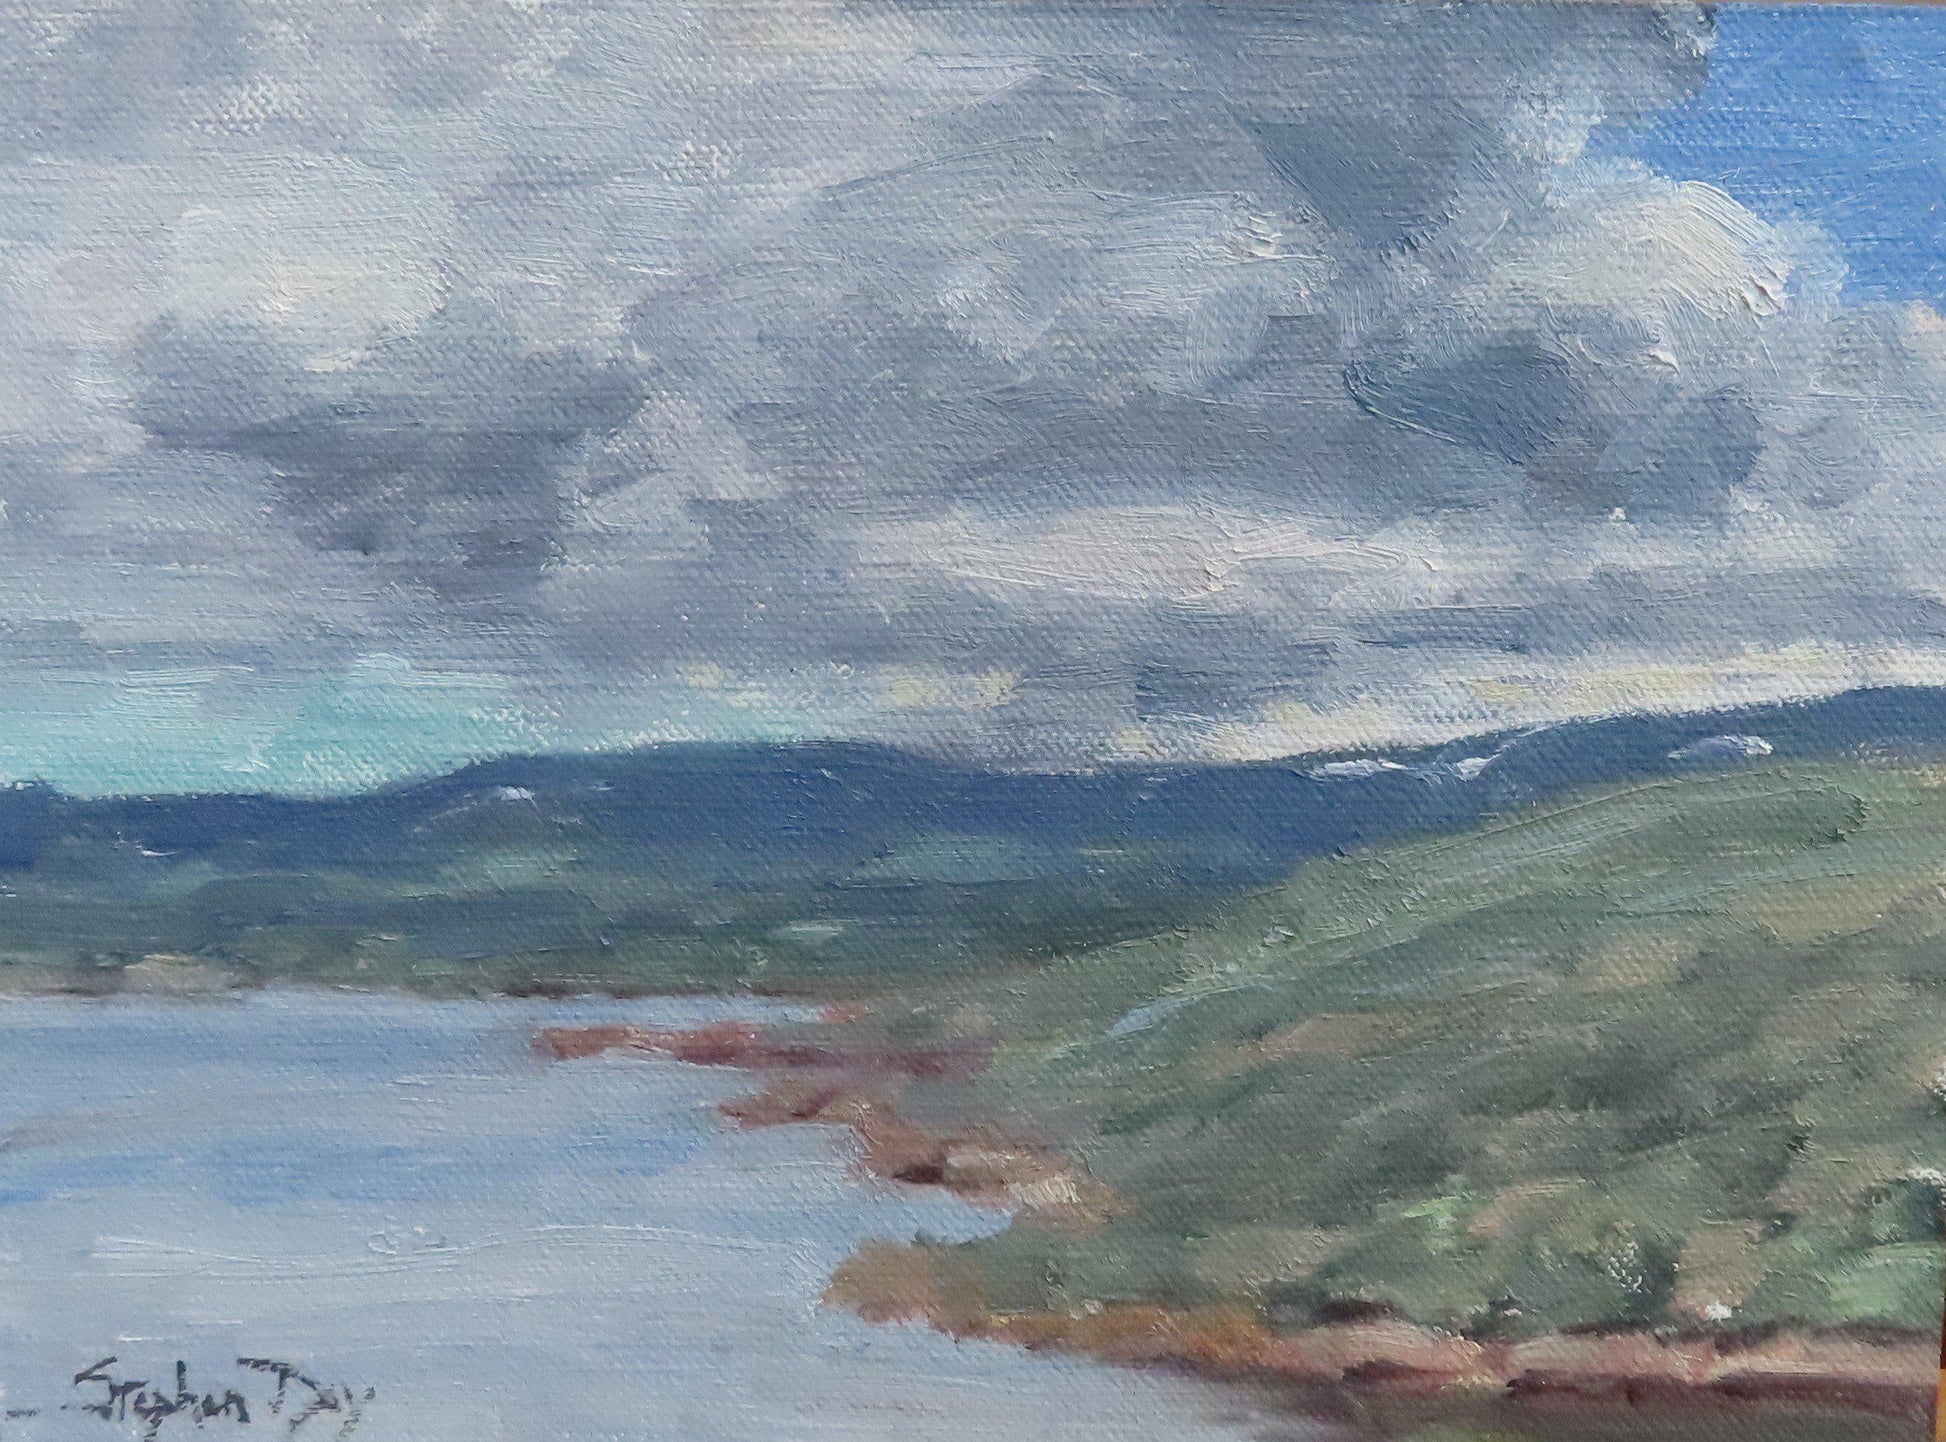 Spring Clouds – Mountain Lake-Painting-Stephen Day-Sorrel Sky Gallery